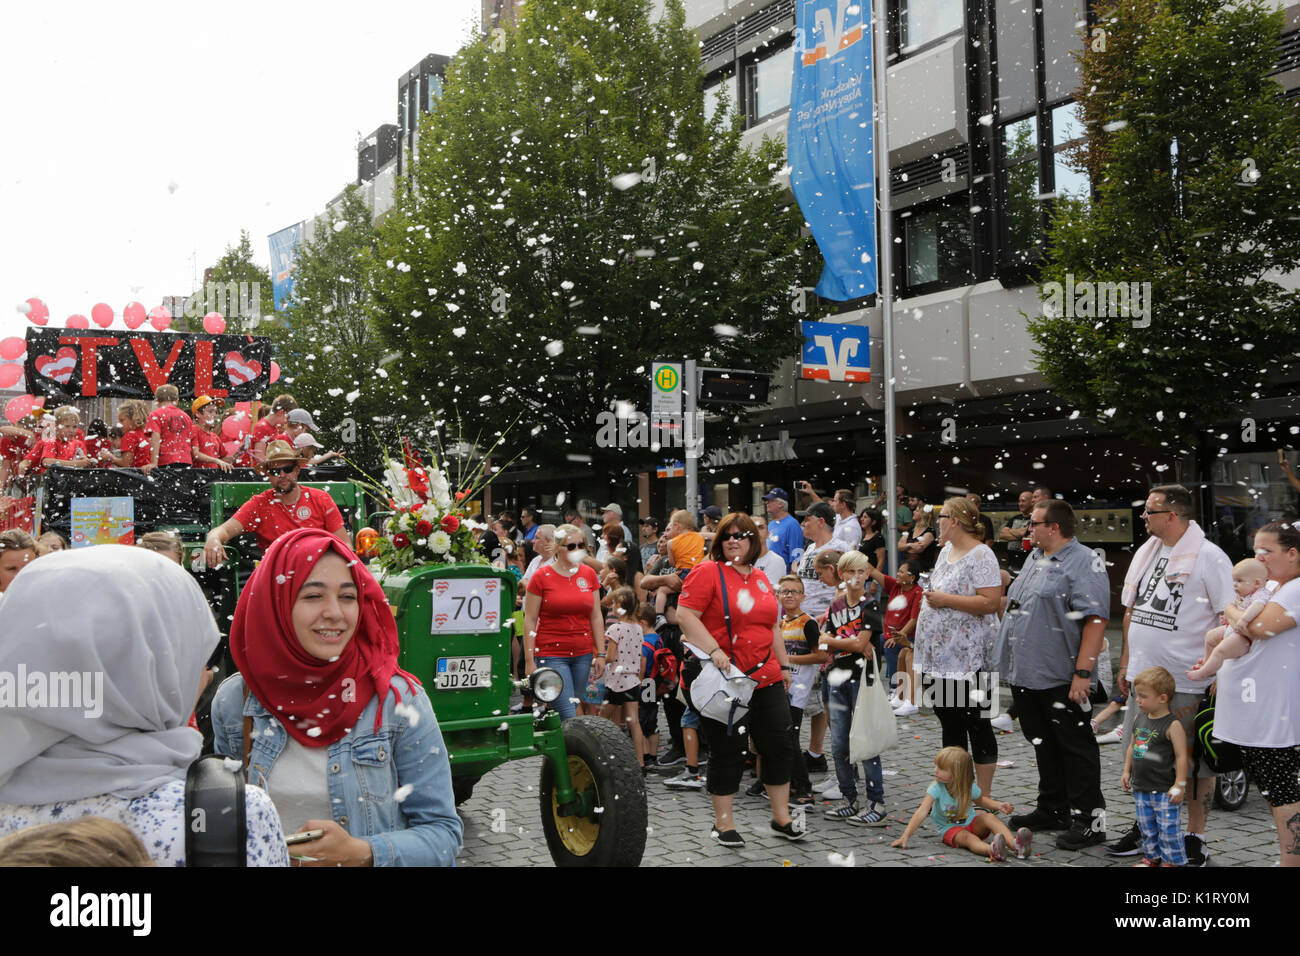 Worms, Germany. 27th August 2017. Artificial snow is blown from a float. The first highlight of the 2017 Backfischfest was the big parade through the city of Worms with over 80 groups and floats. Community groups, music groups and business from Worms and further afield took part. Credit: Michael Debets/Alamy Live News Stock Photo